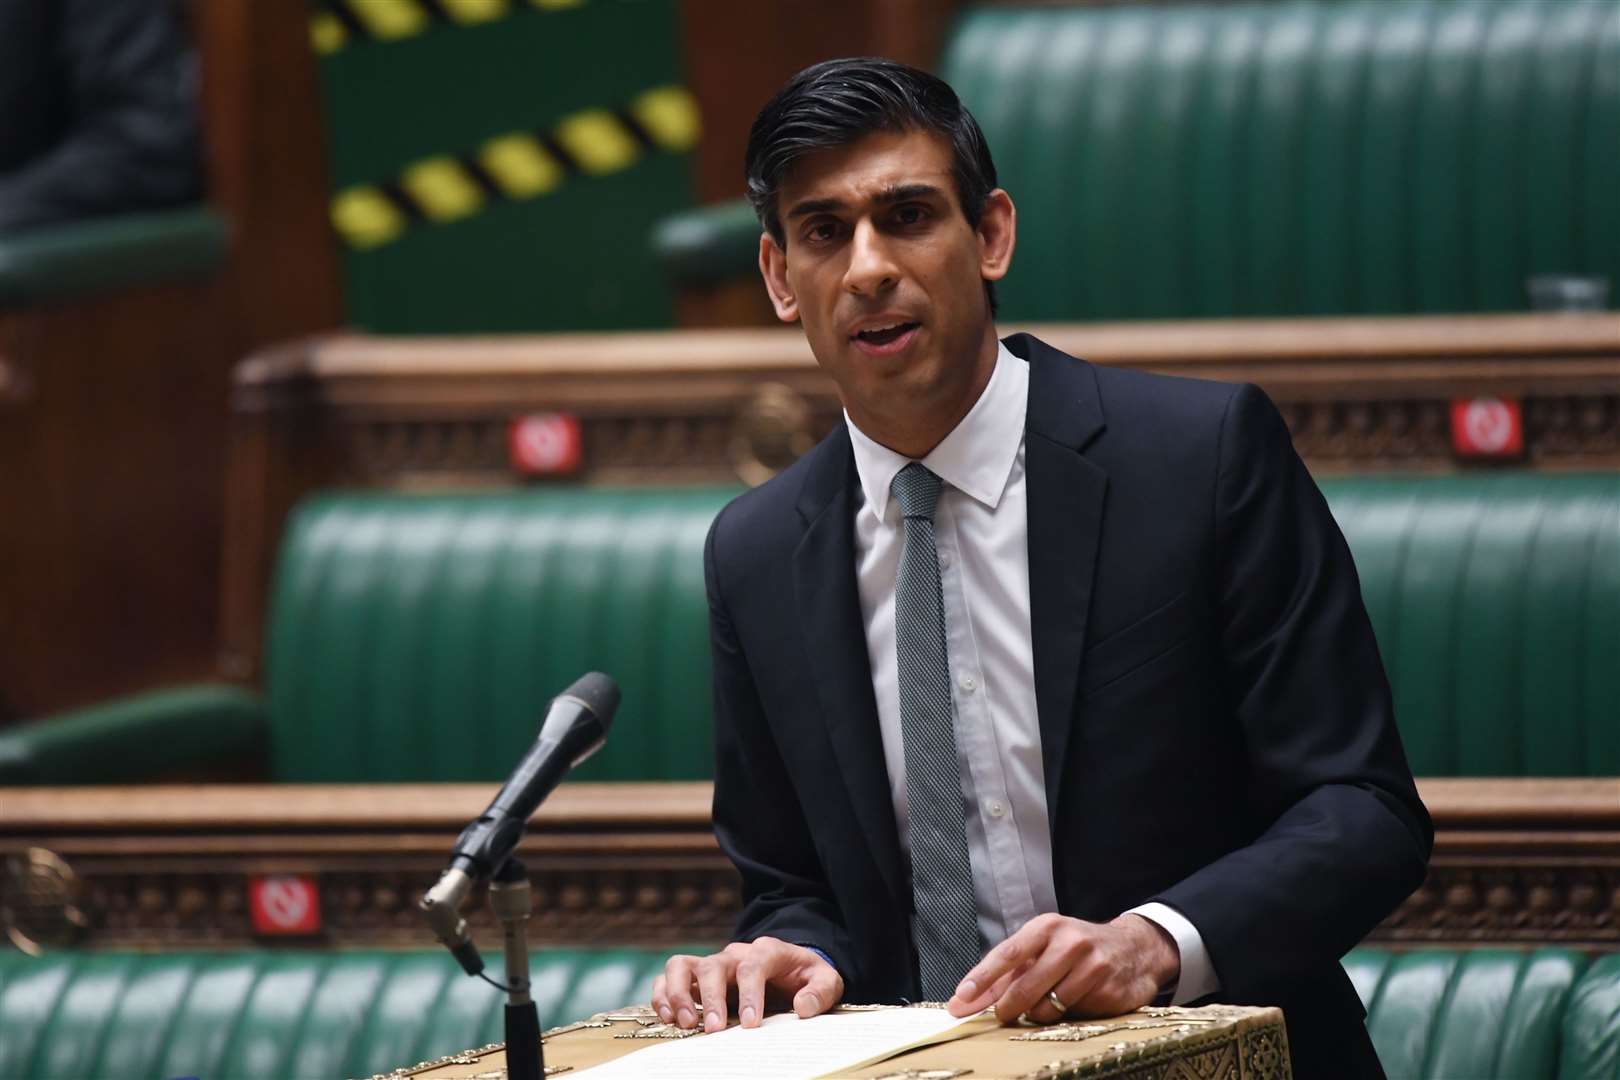 Chancellor Rishi Sunak froze personal income tax allowance in his Budget (UK Parliament/Jessica Taylor)